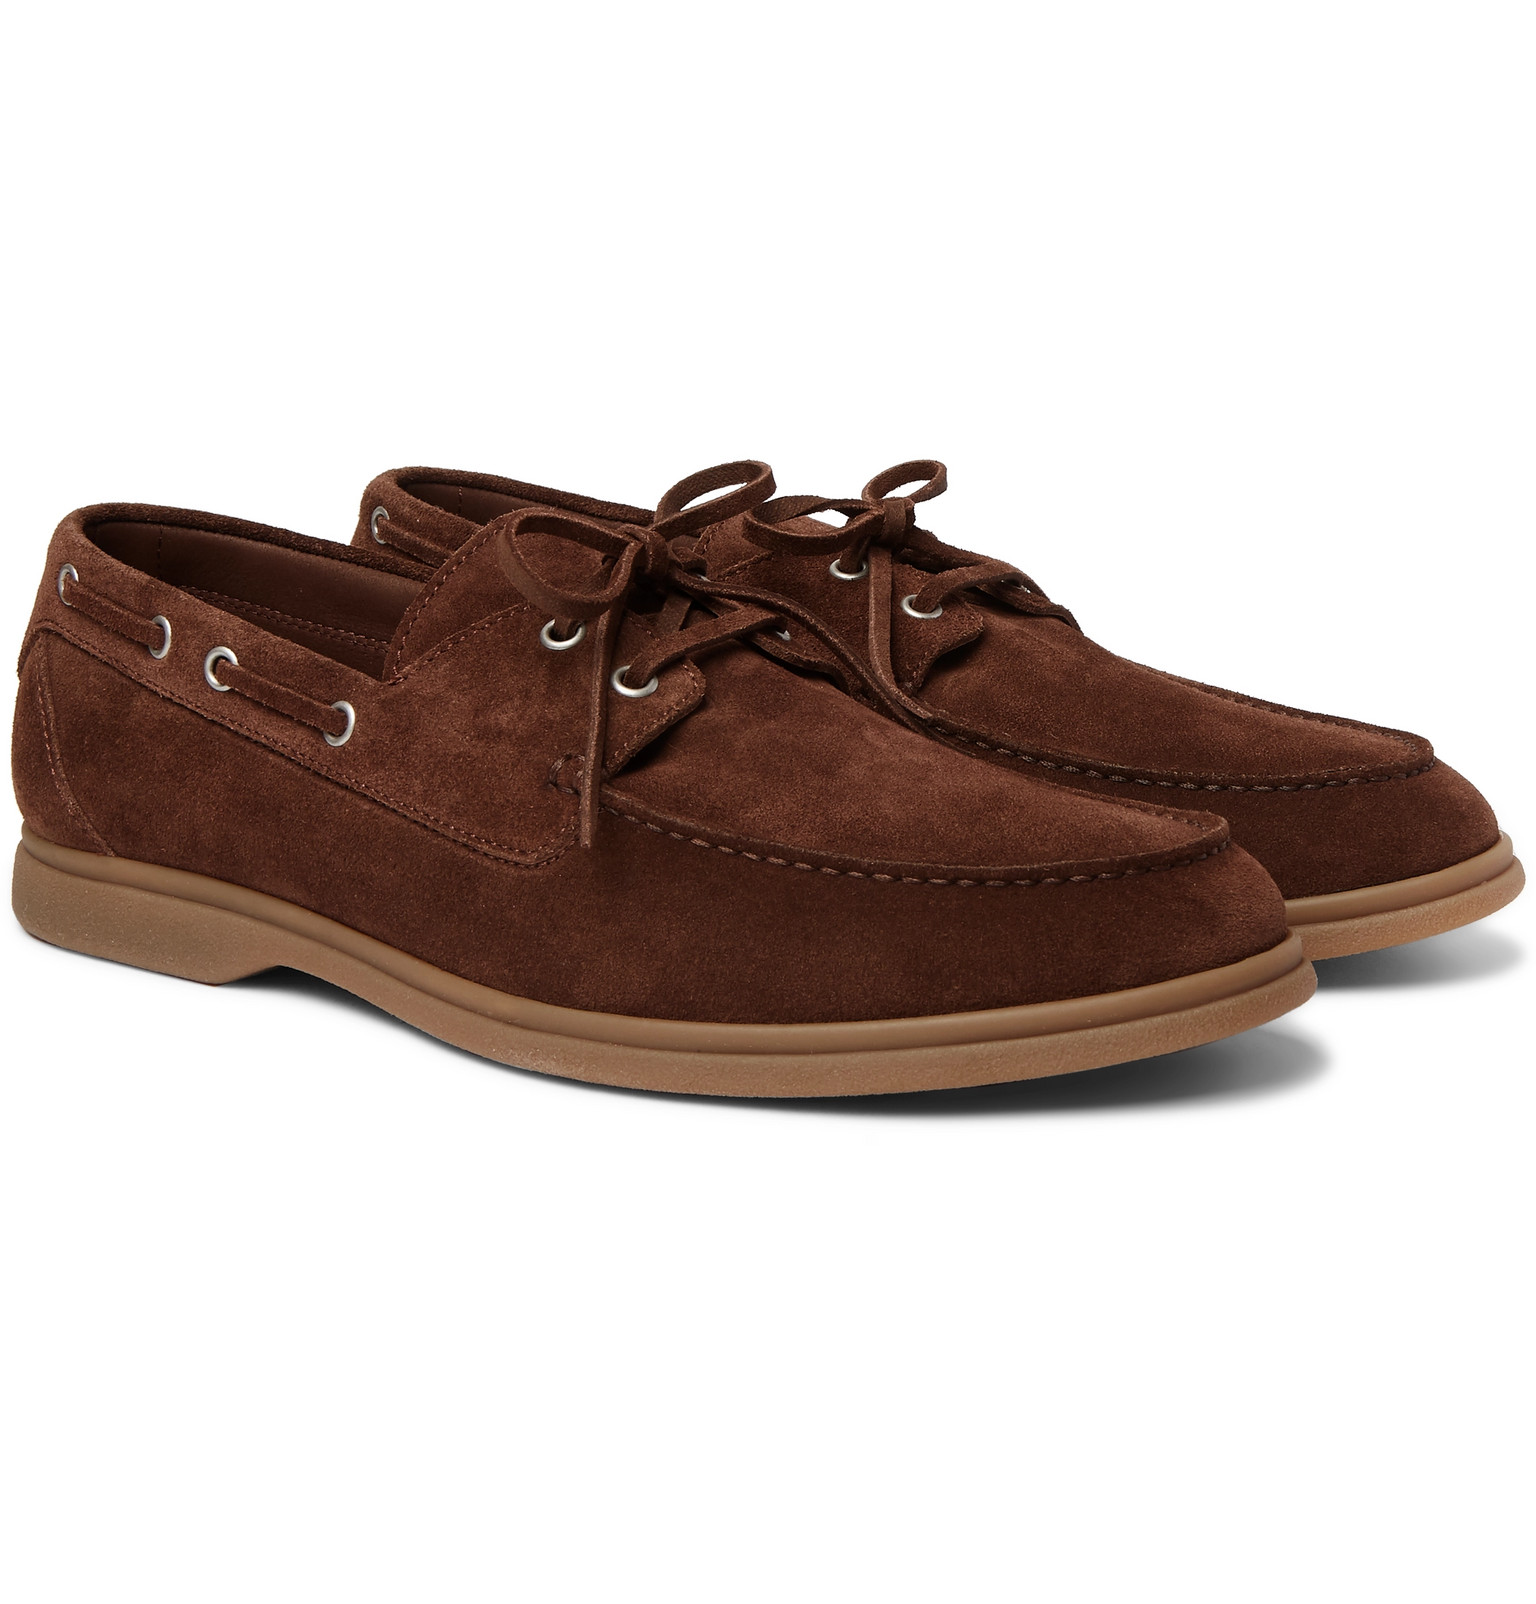 suede boat shoes